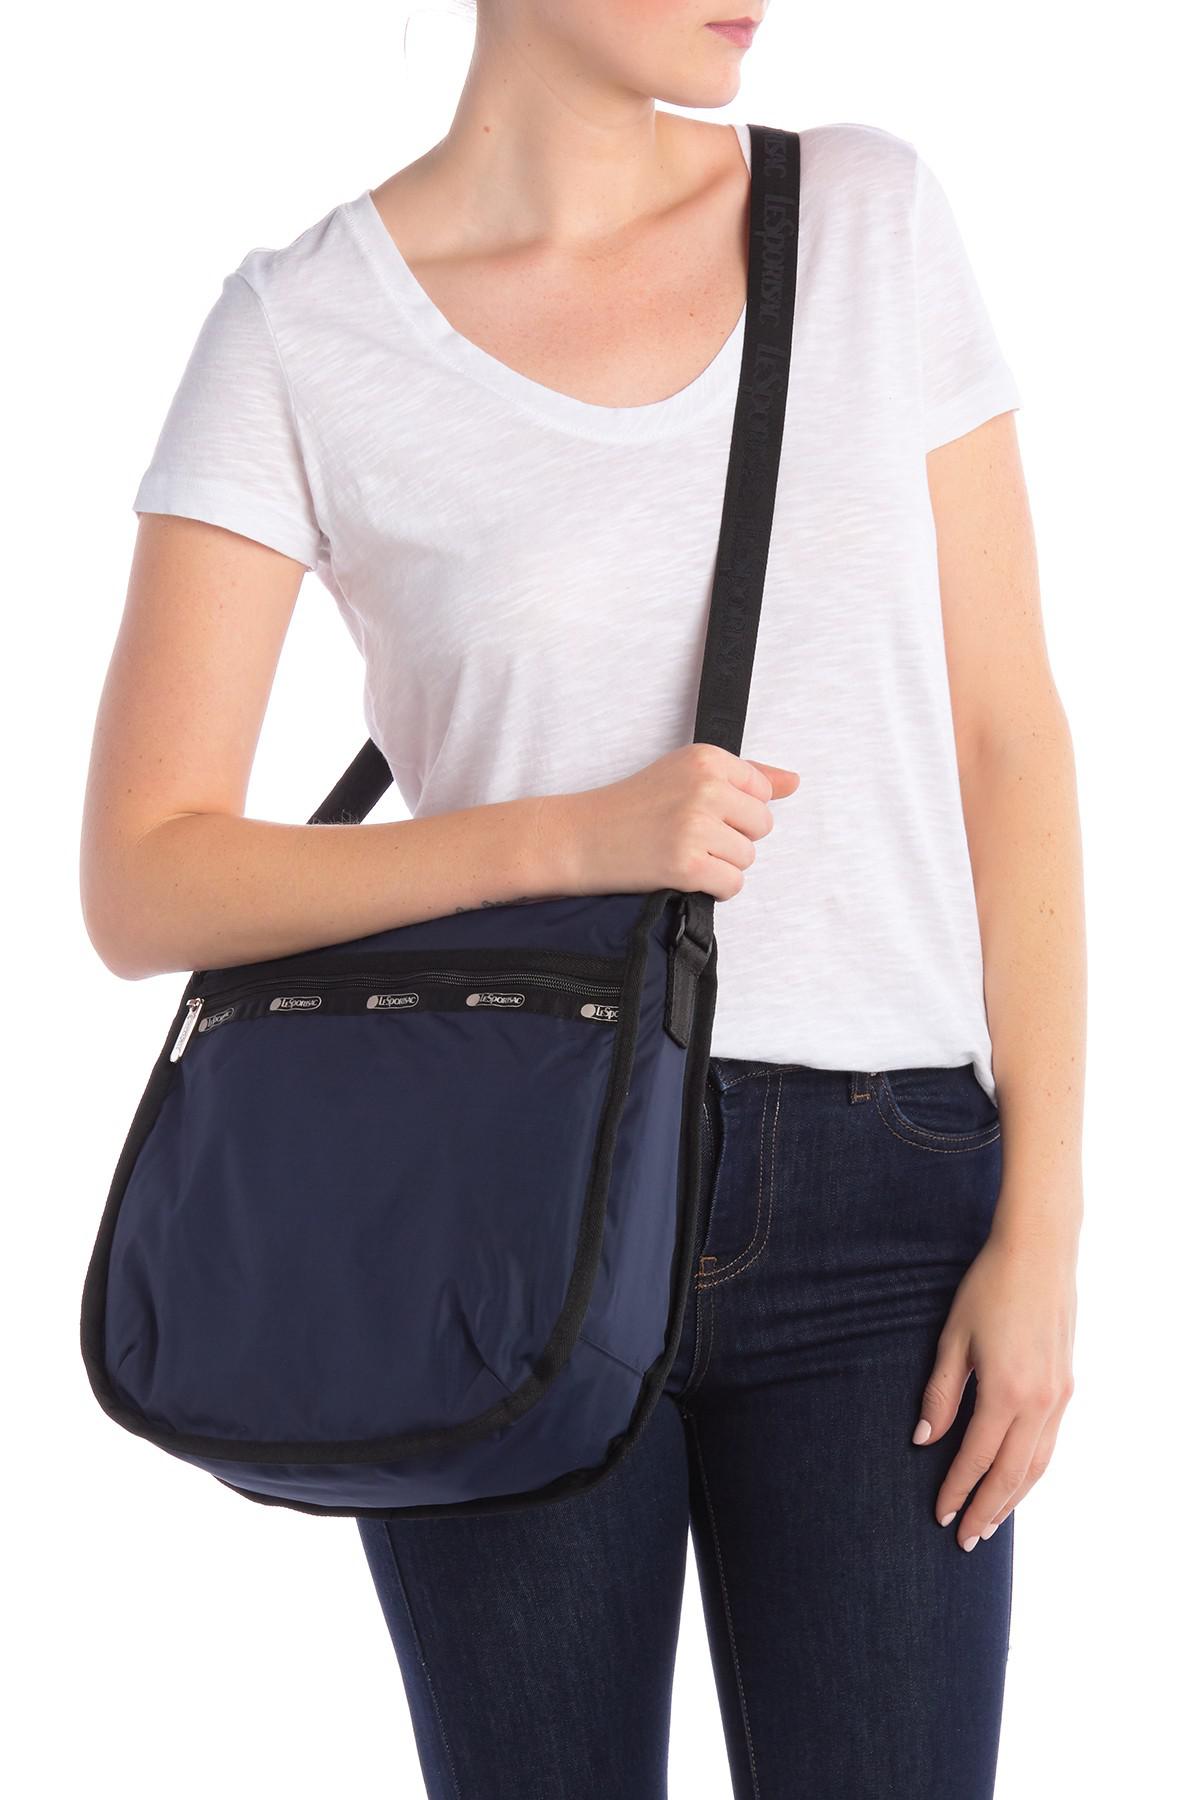 LeSportsac Synthetic Rebecca Large Top Zip Crossbody Bag in Navy (Blue) - Lyst